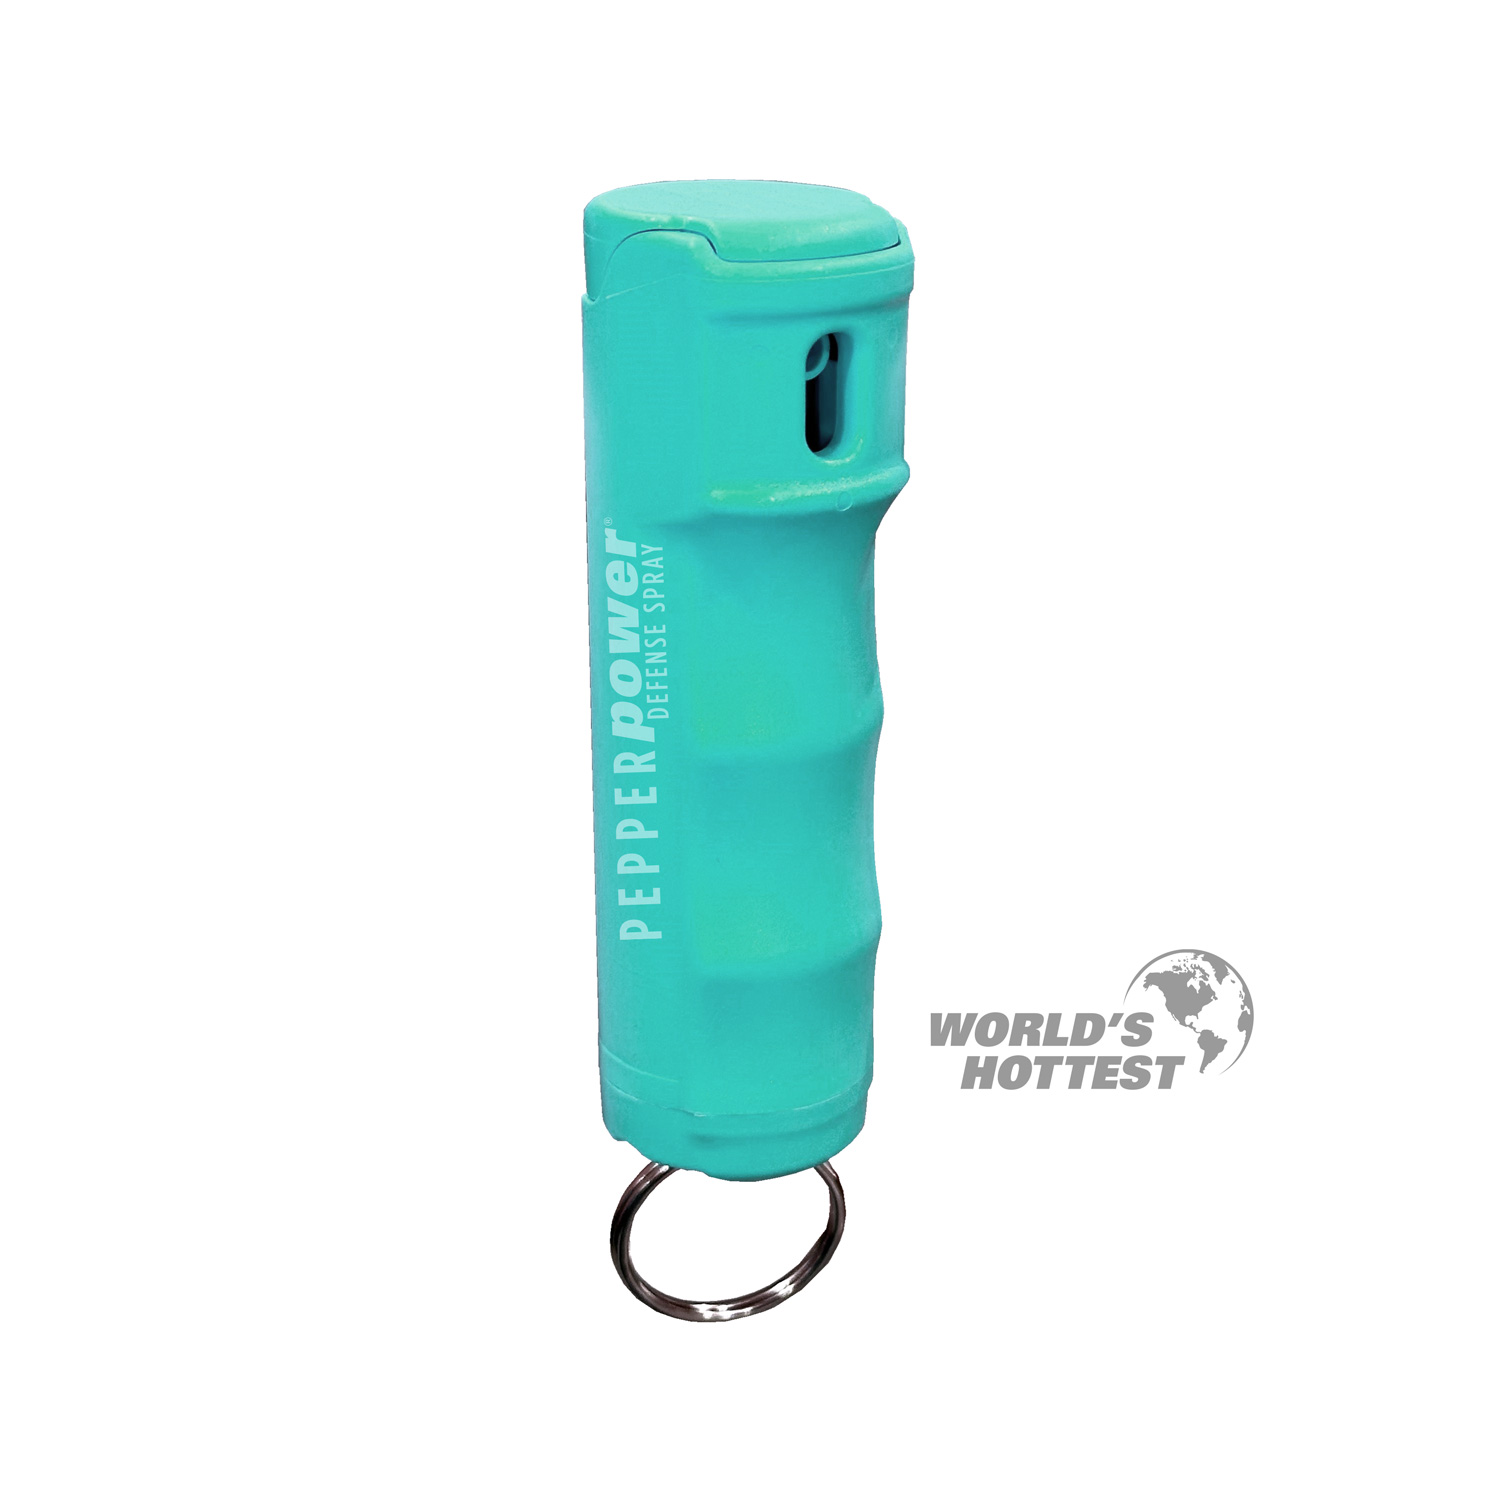 #TK1 UDAP Teal Keychain Pepper Spray Stream with the World's Hottest Formula - NEW!